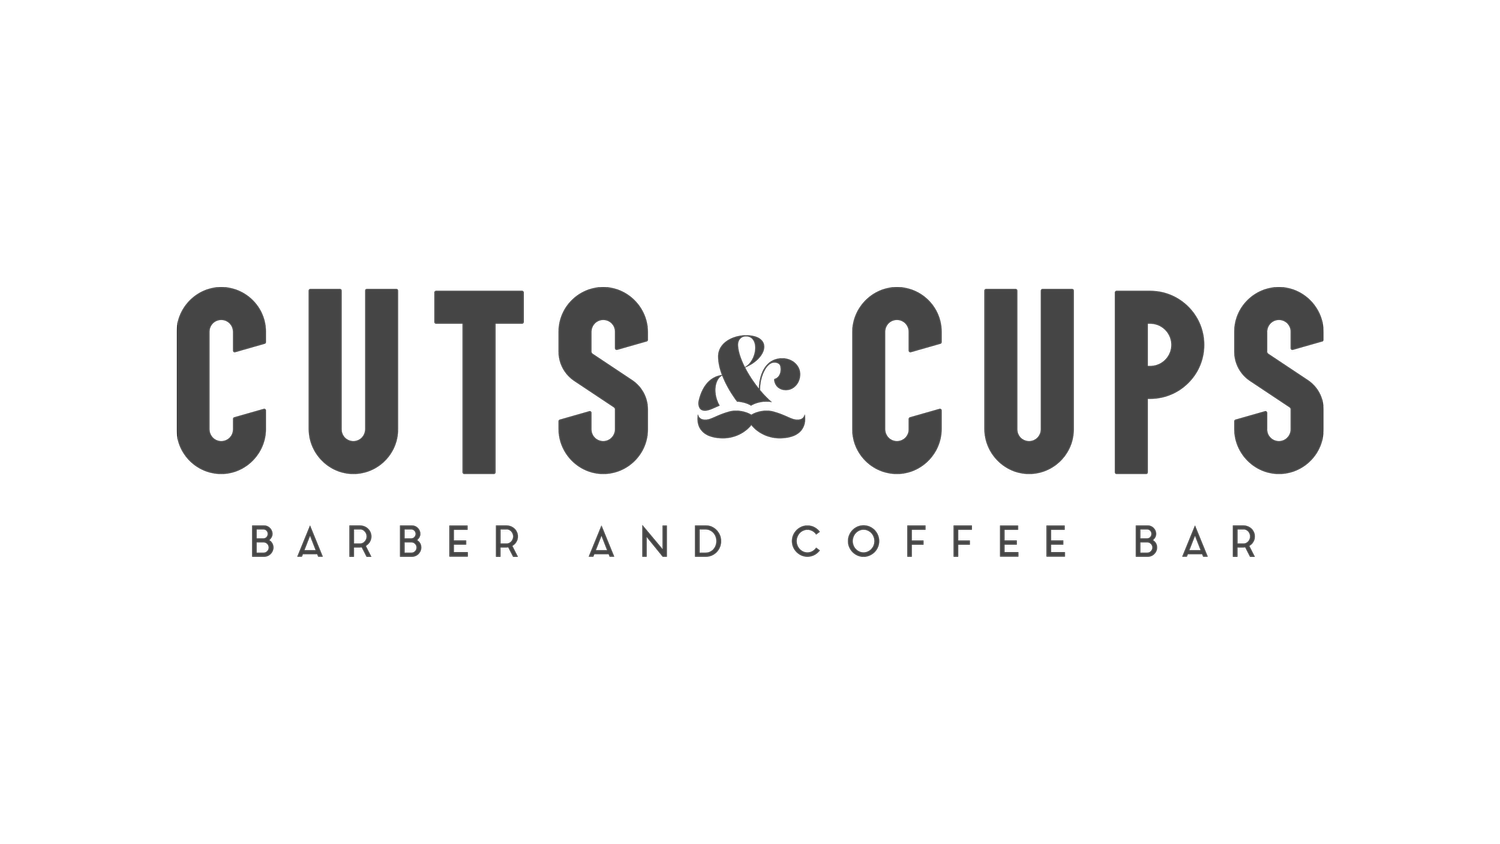 Cuts and cups